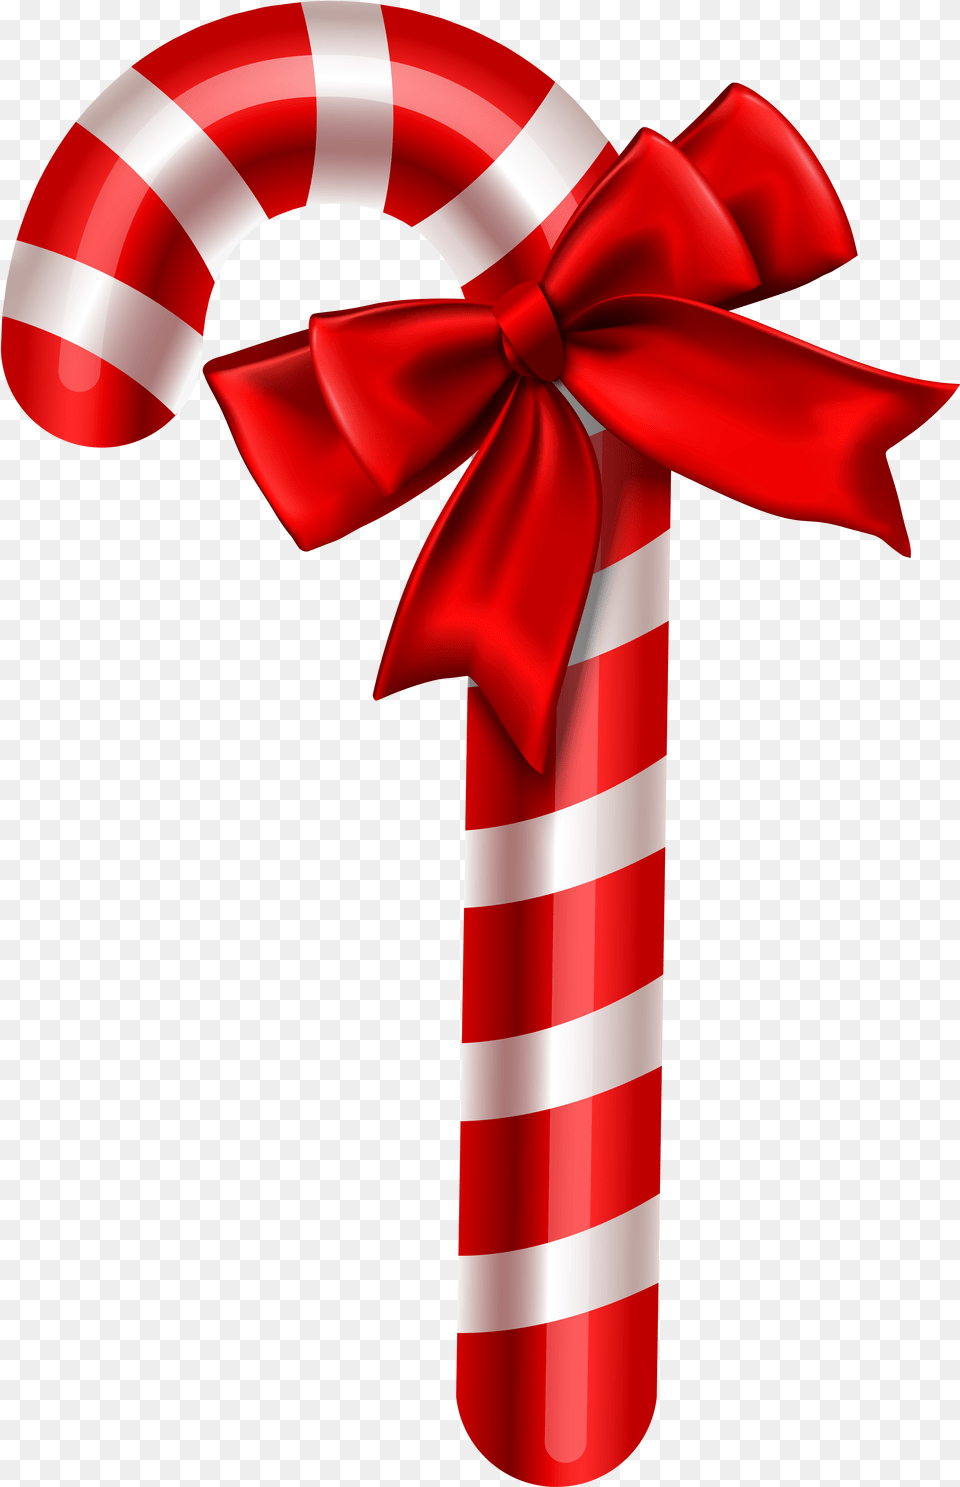 Christmas Ornament Candy Cane Canes, Stick, Food, Sweets, Dynamite Png